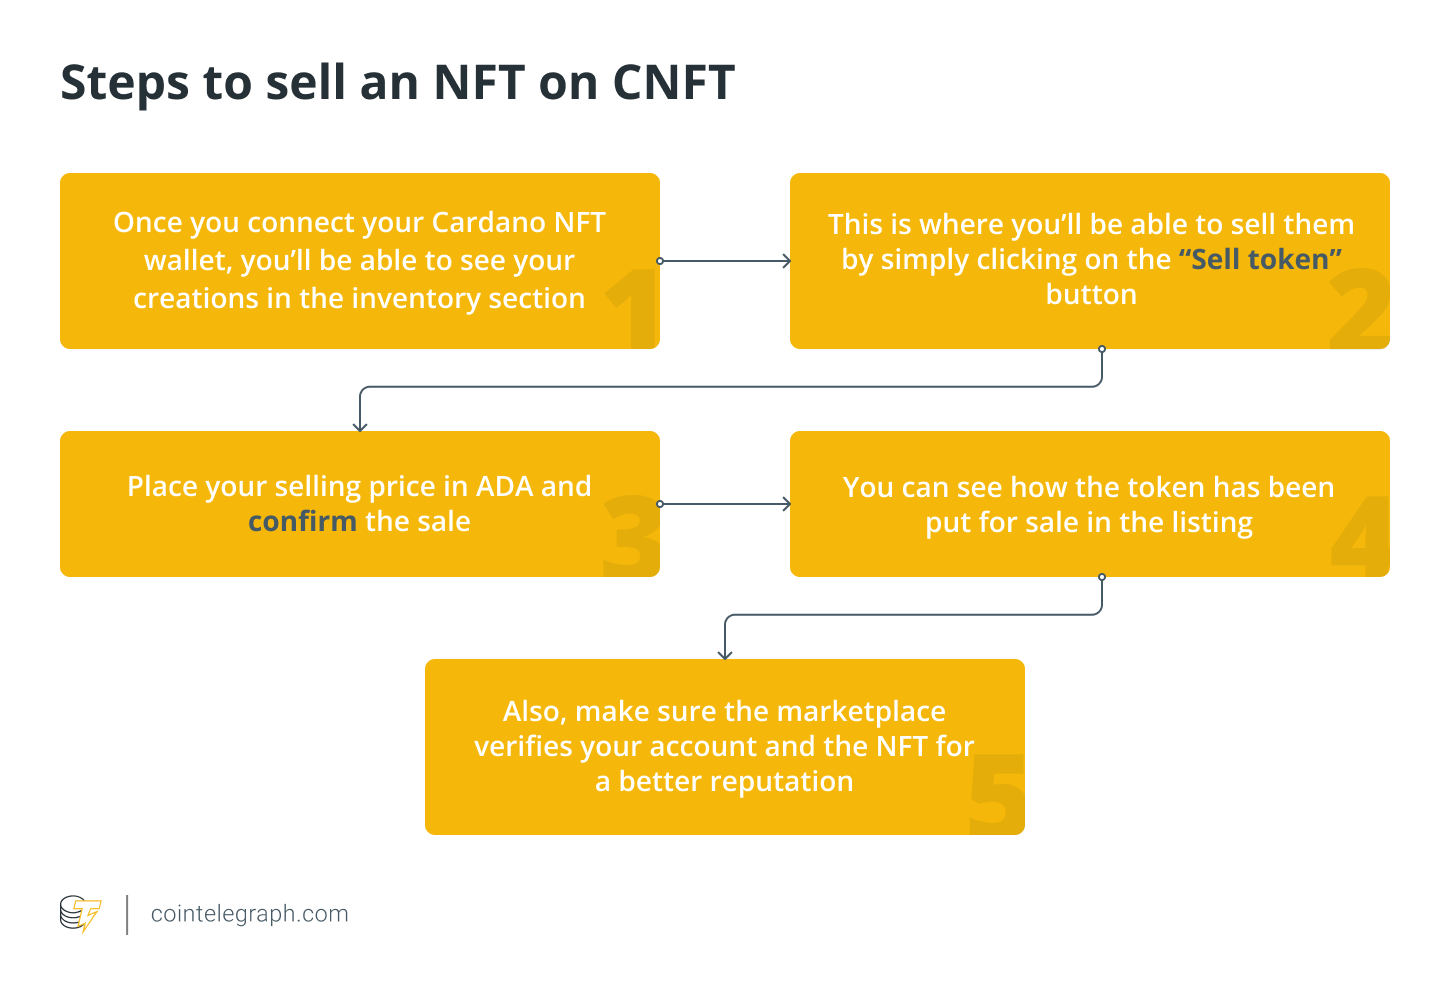 Steps to sell an NFT in CNFT